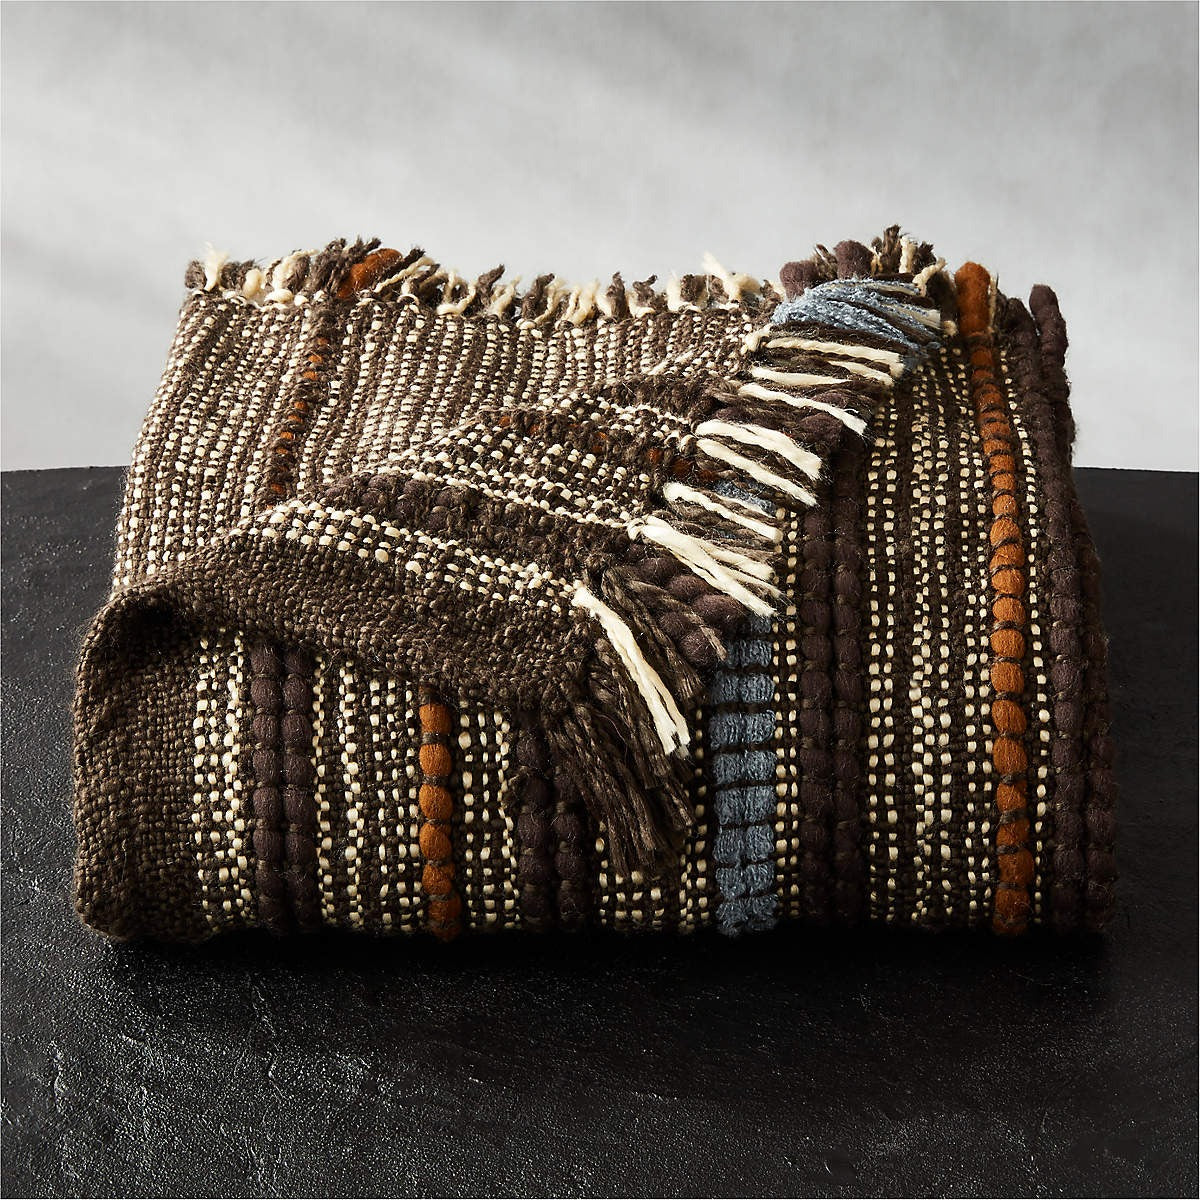 LINEAGE WOVEN THROW